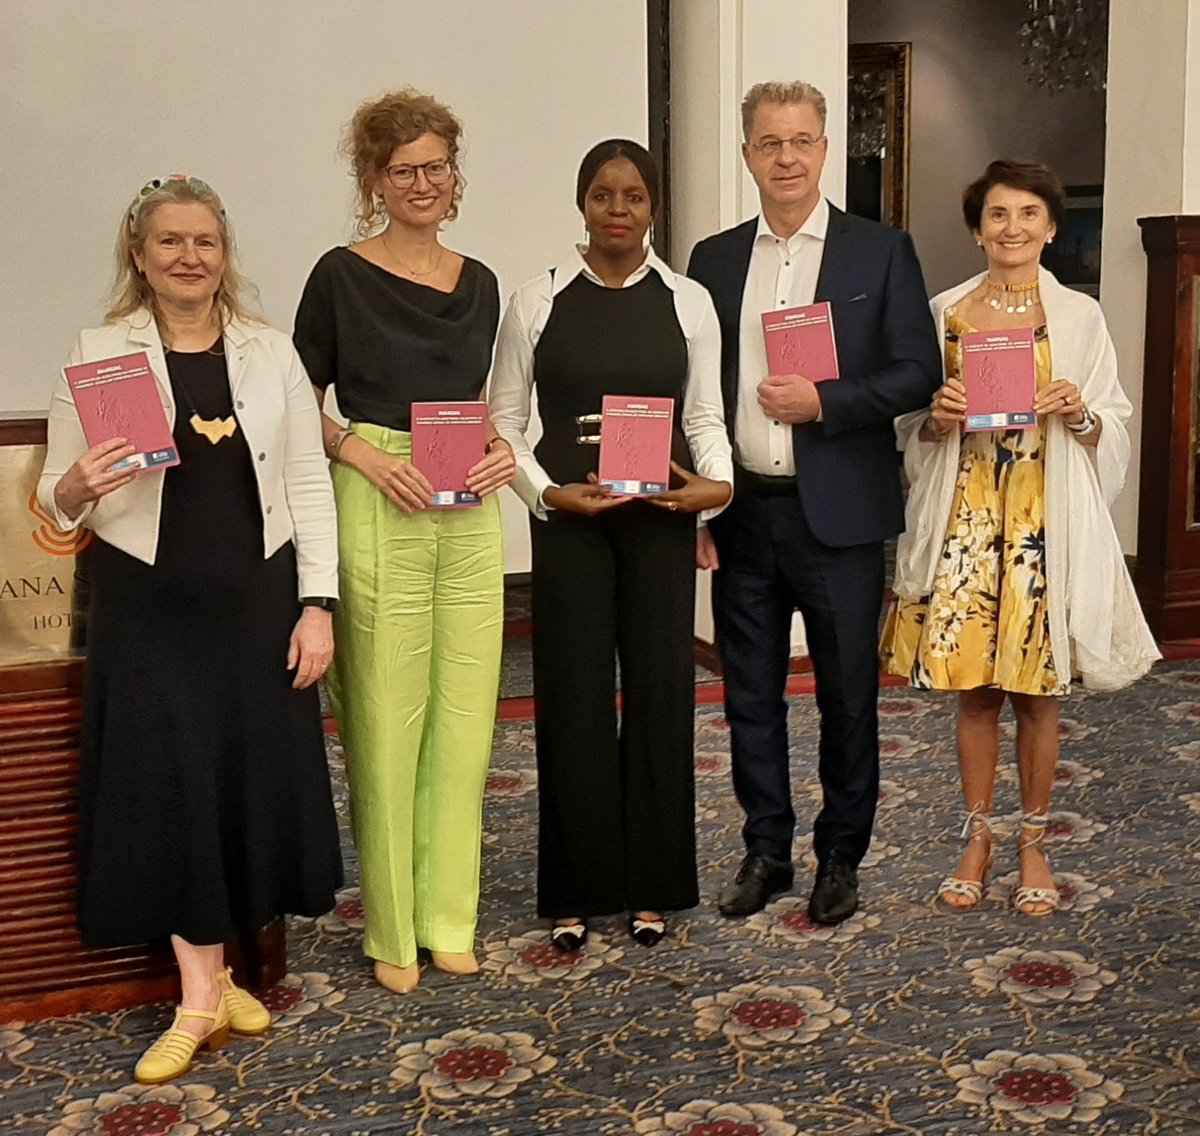 Just in time for #InternationalWomensDay, we're glad to announce the launch of the Portuguese edition of the handbook on prosecuting conflict-related sexual crimes, by @unirmct & us. The launch was at the end of a 3-day seminar on the topic with Mozambican prosecutors in Maputo.